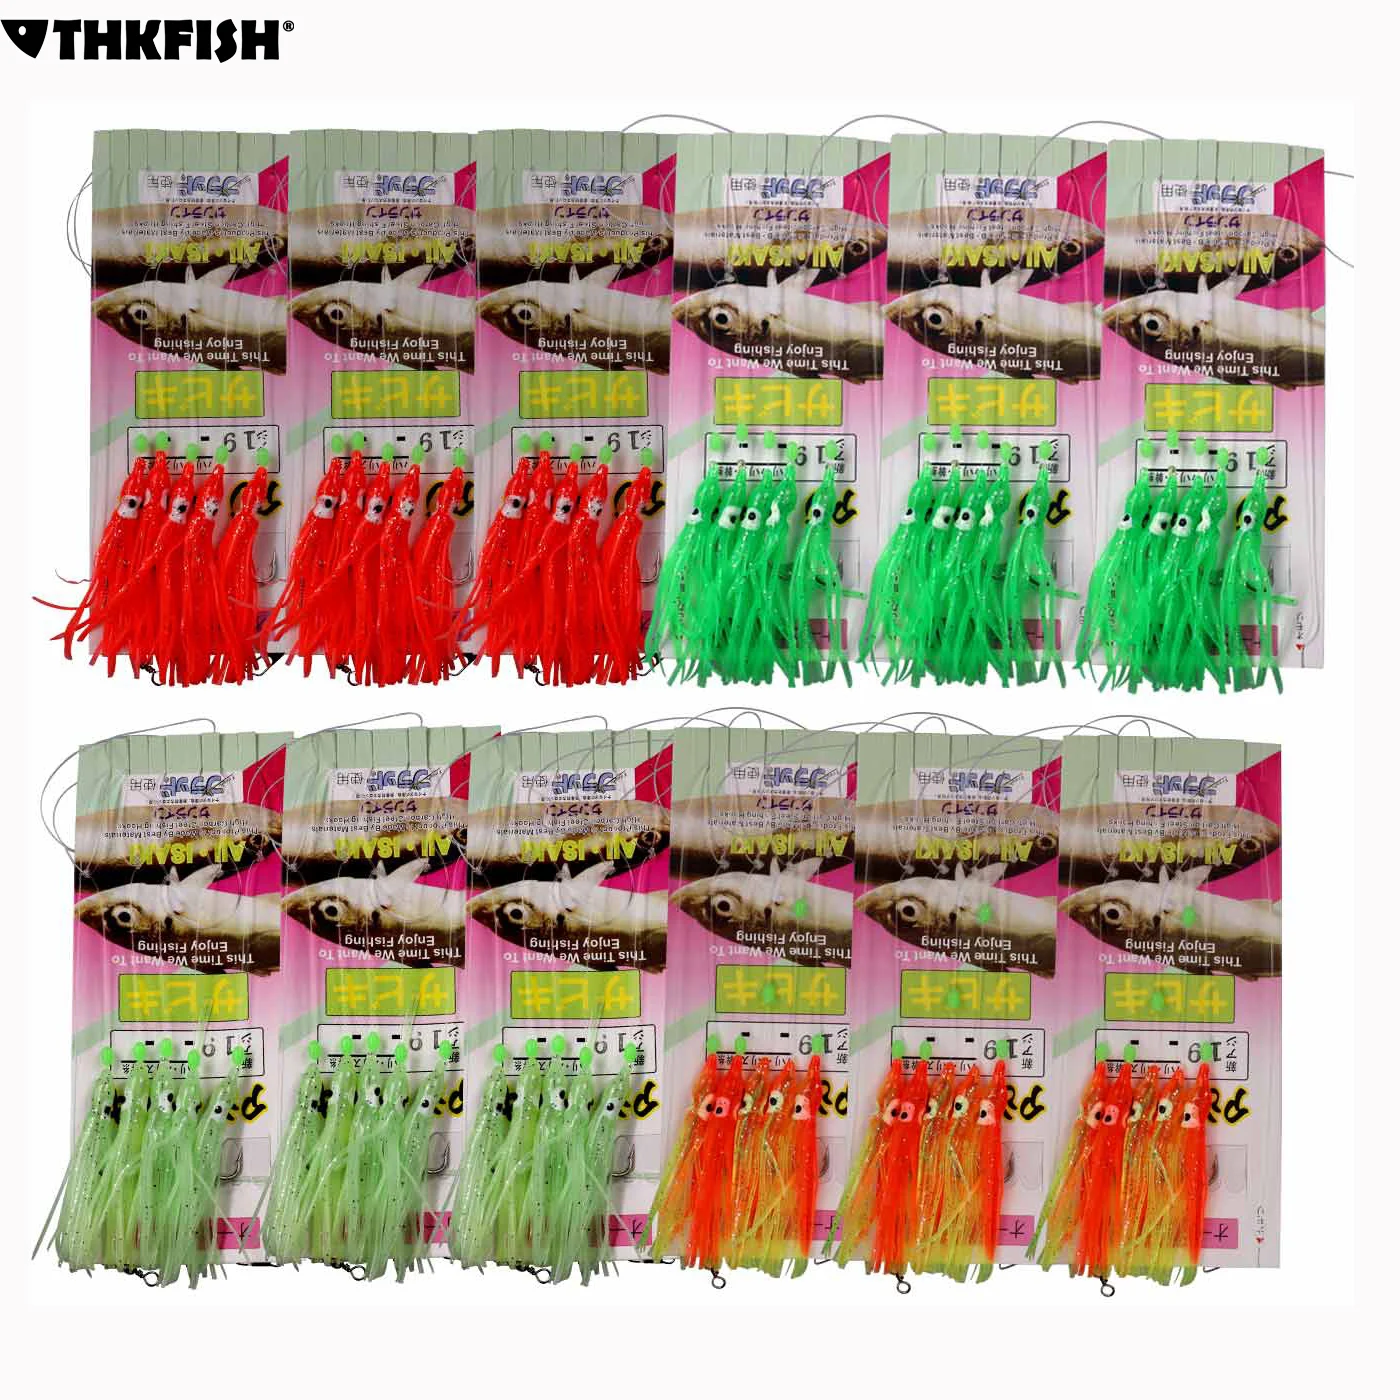 

60pcs (12 Packs) Squid Jig Sabiki Fishing Rigs Freshwater Saltwater Glow and Red Squid Bait Hooks With Snap Connector